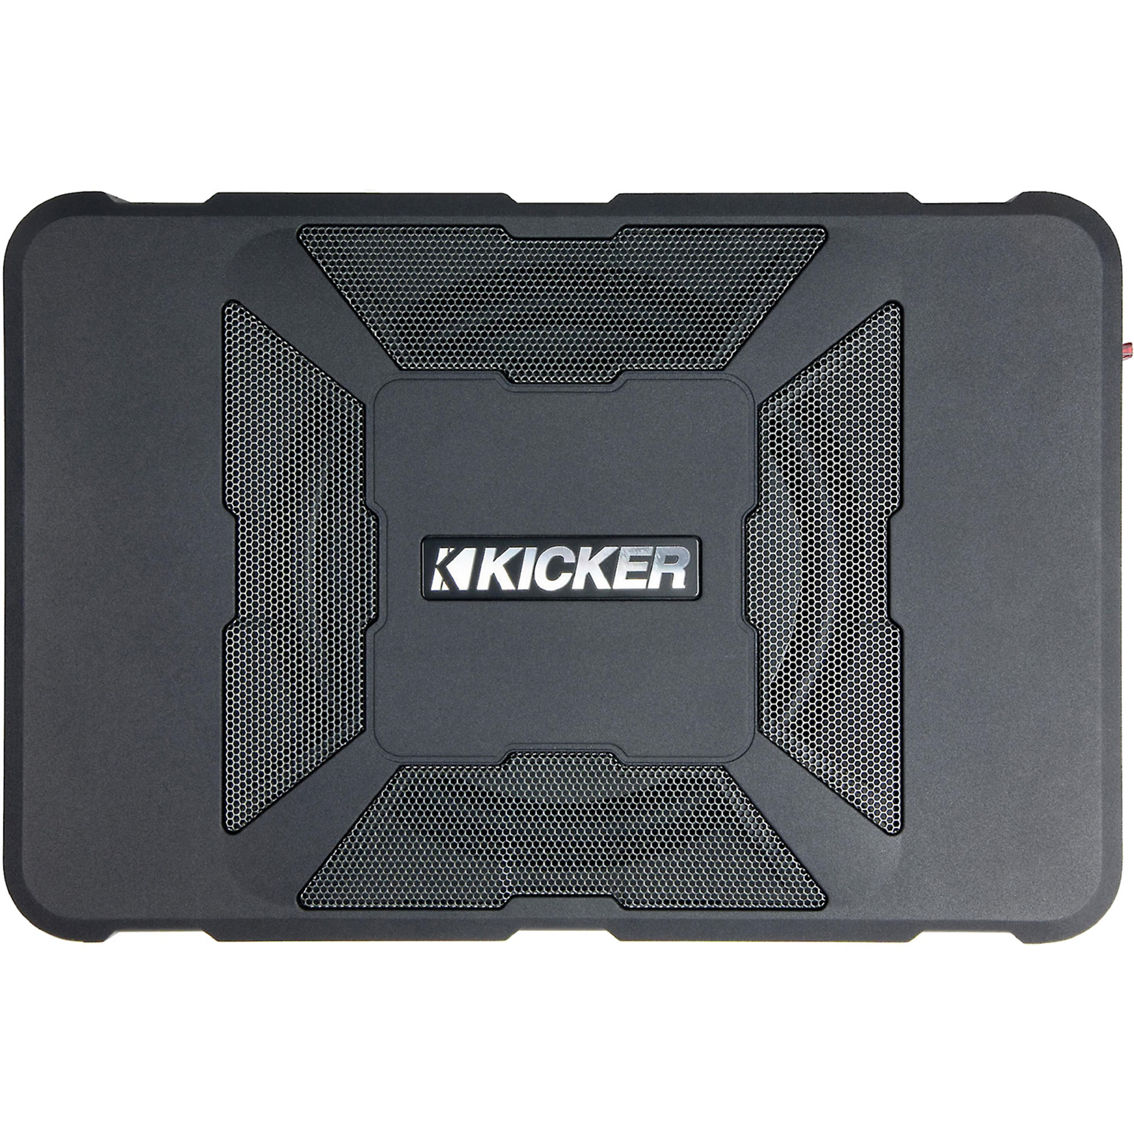 Kicker Hideaway Compact Powered Subwoofer - Image 4 of 4